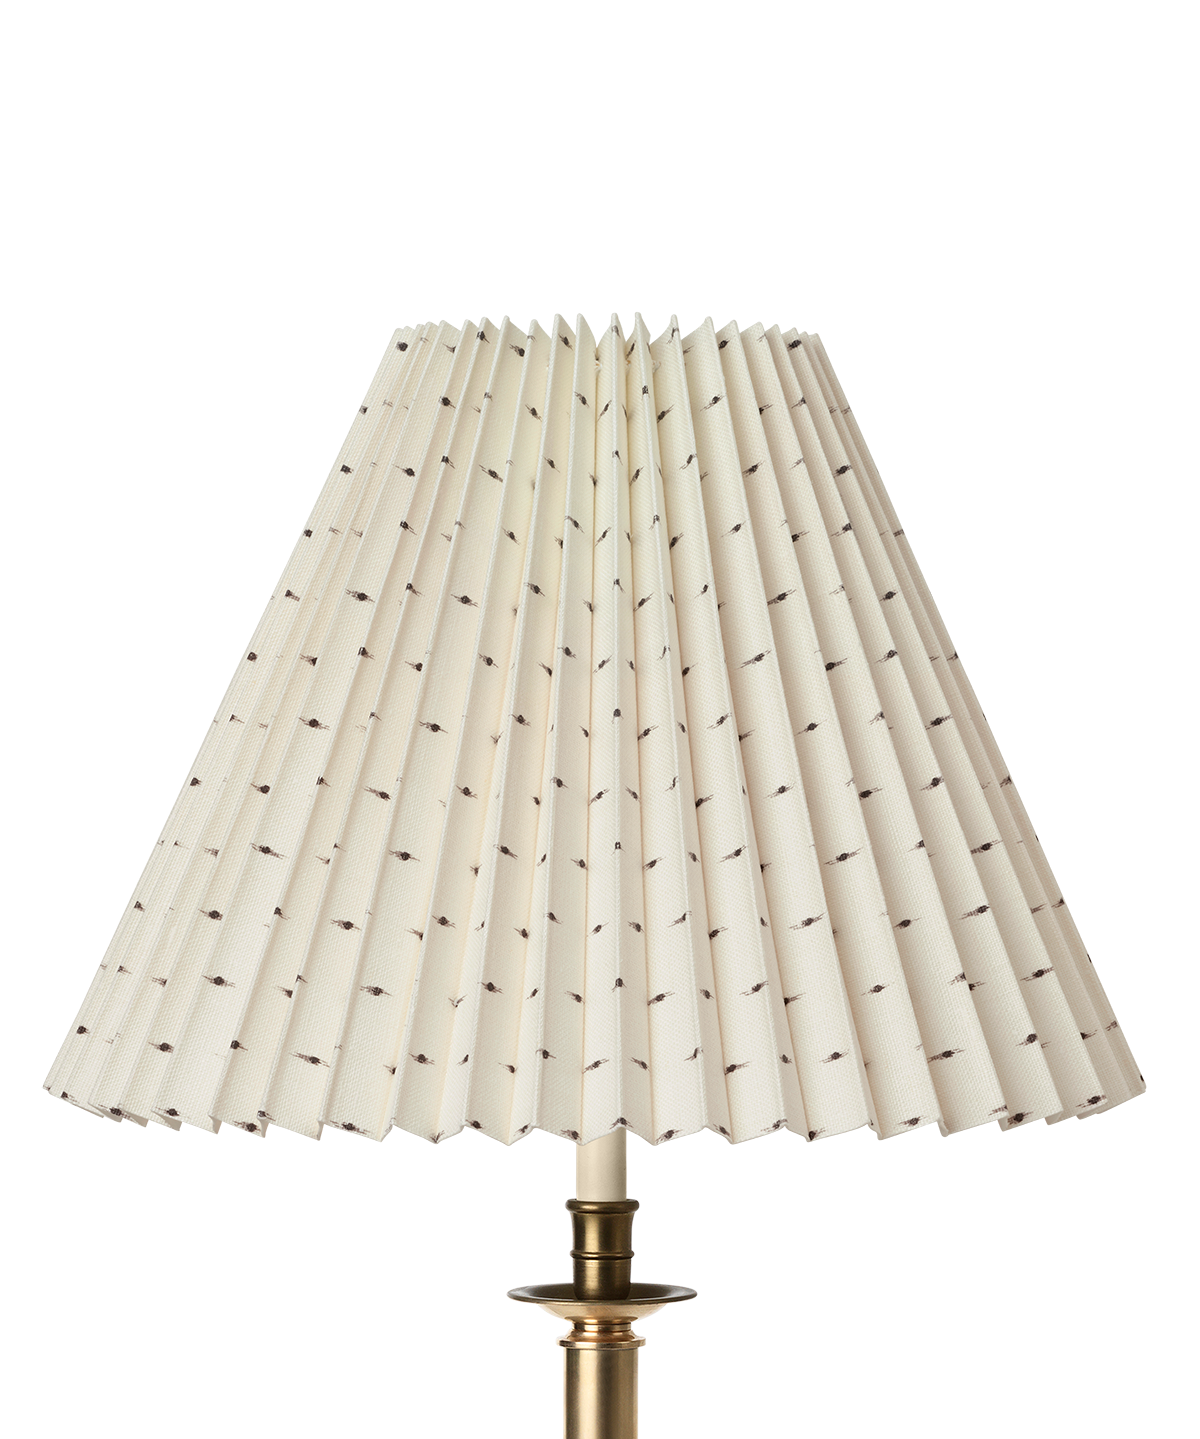 Drop Pleated Lampshade, Charcoal